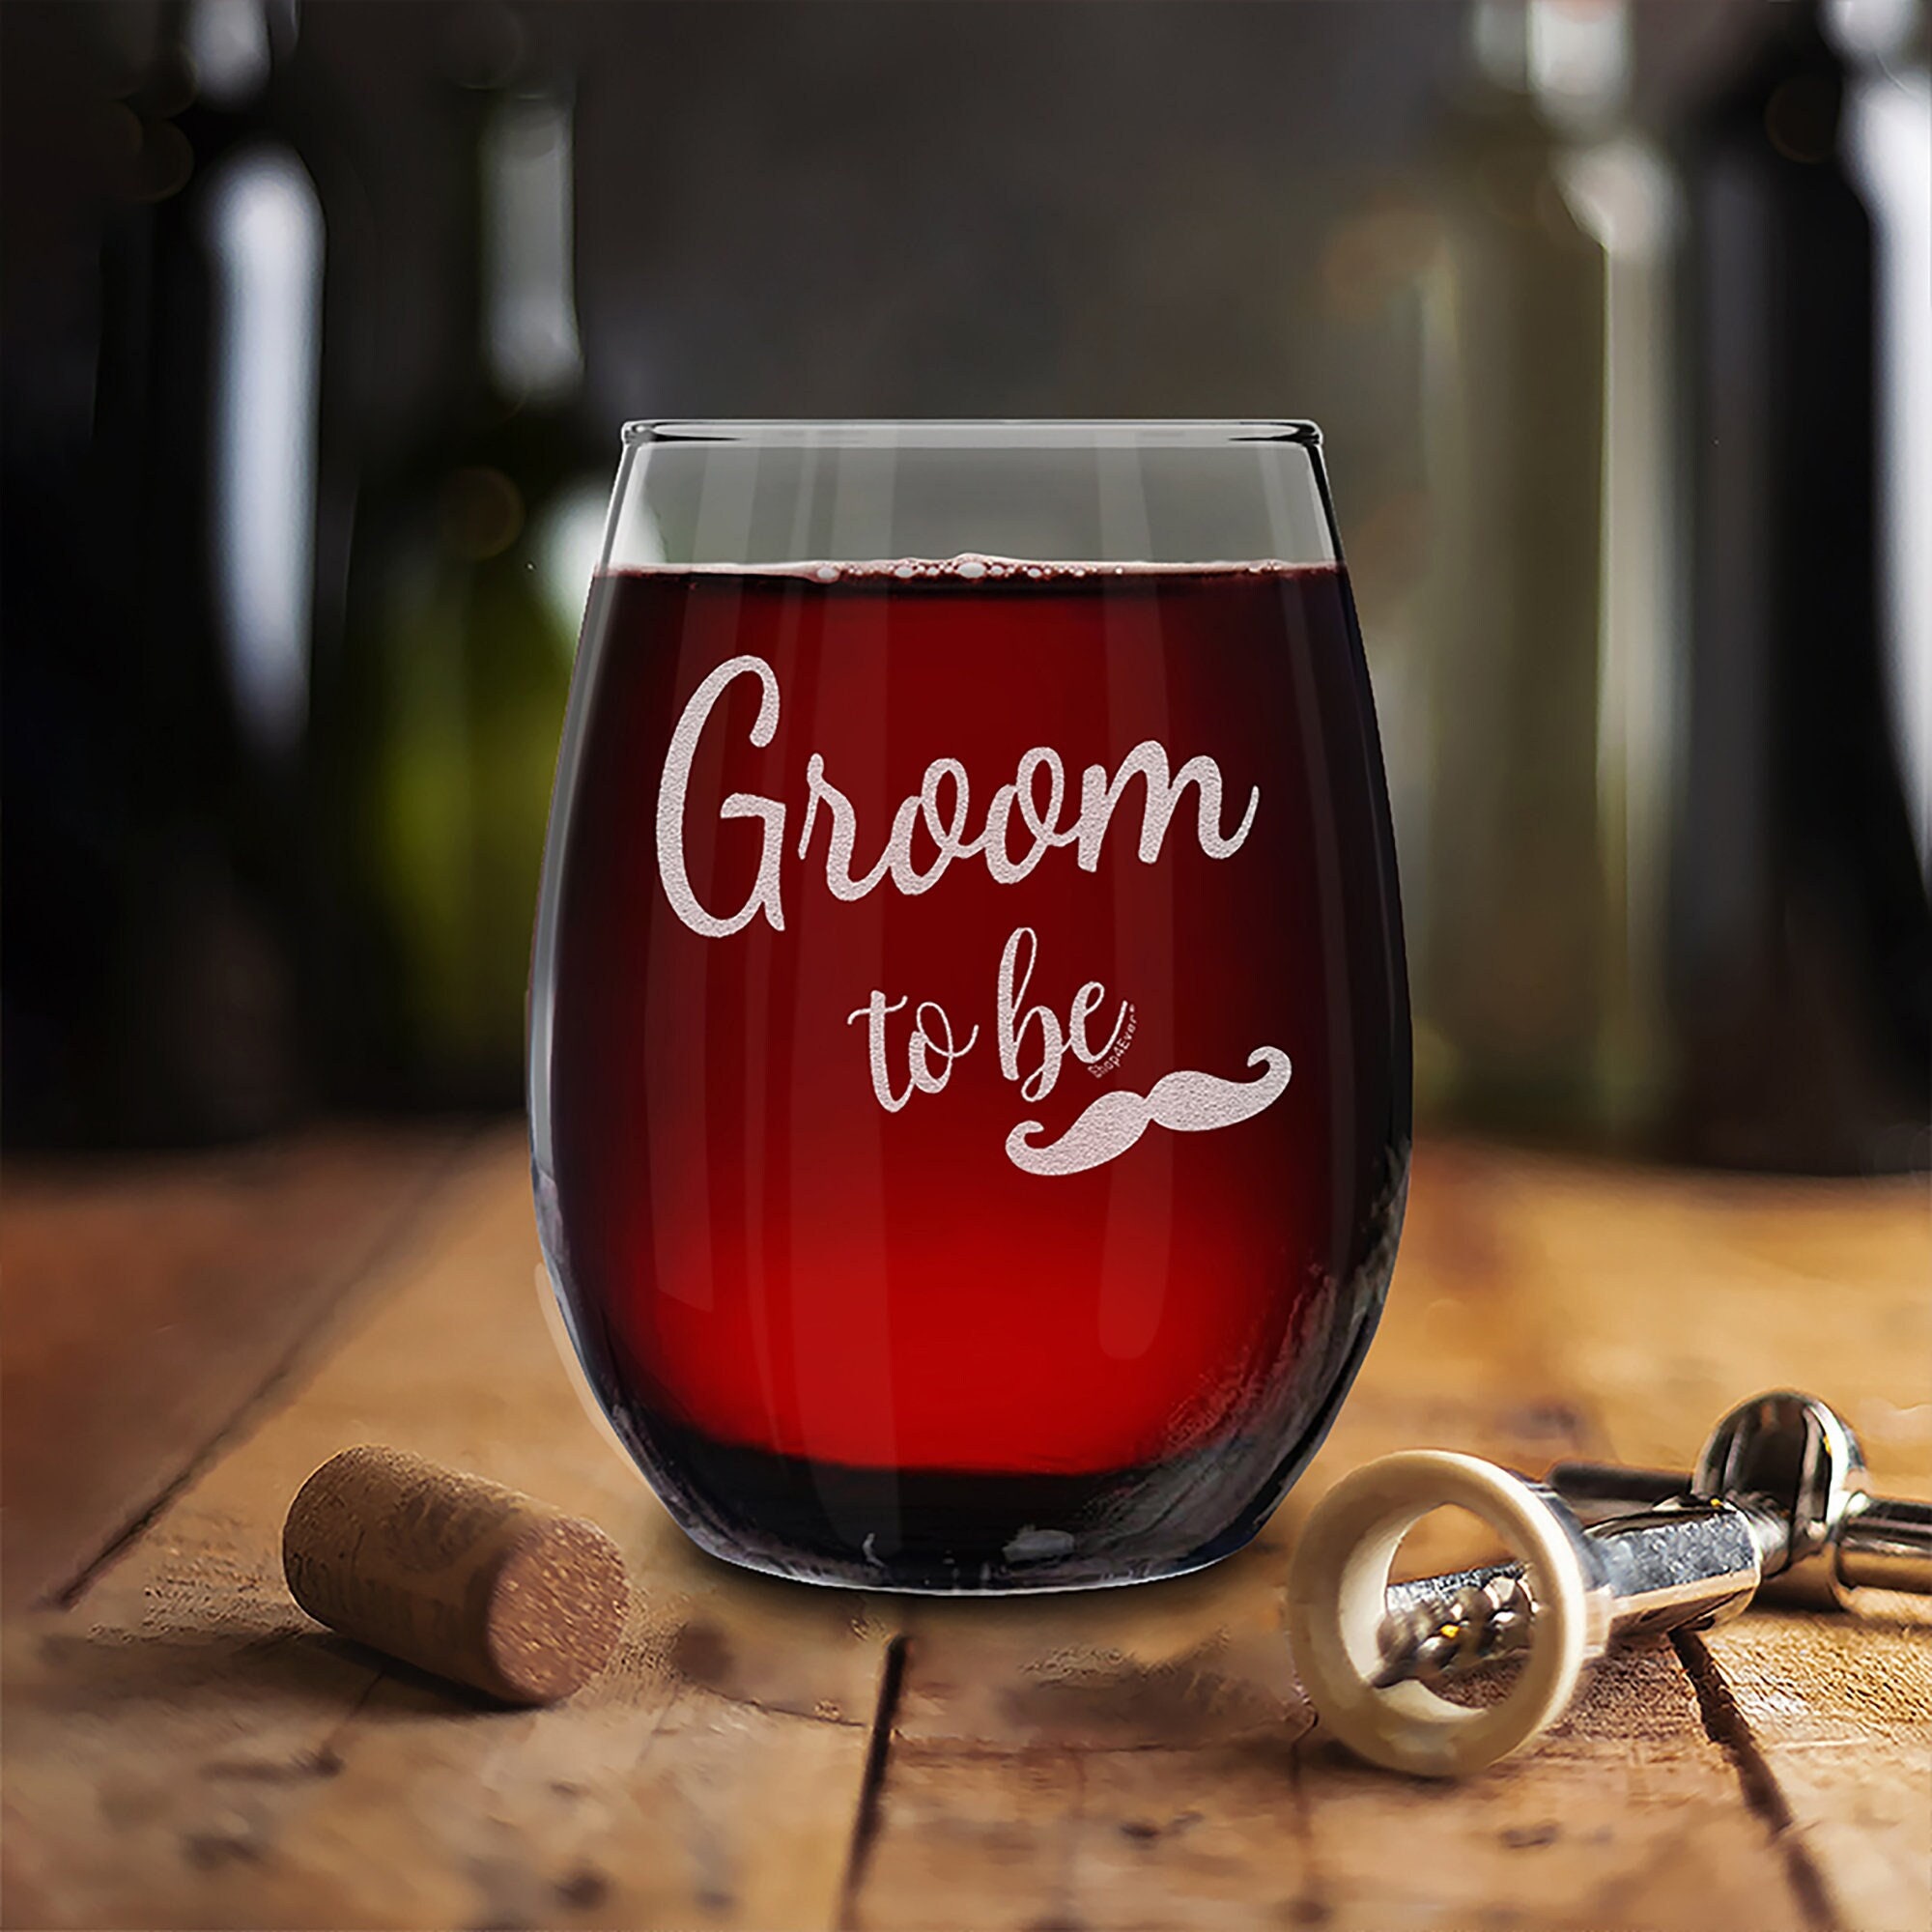 Wedding Gifts for Couples, Bridal Shower Gift Engagement Gifts  for Bride and Groom to Be, Mr and Mrs Wine Glasses(17oz) Honeymoon Gifts  Wedding Gifts for Newlyweds, Anniversary Couples Gifts: Wine